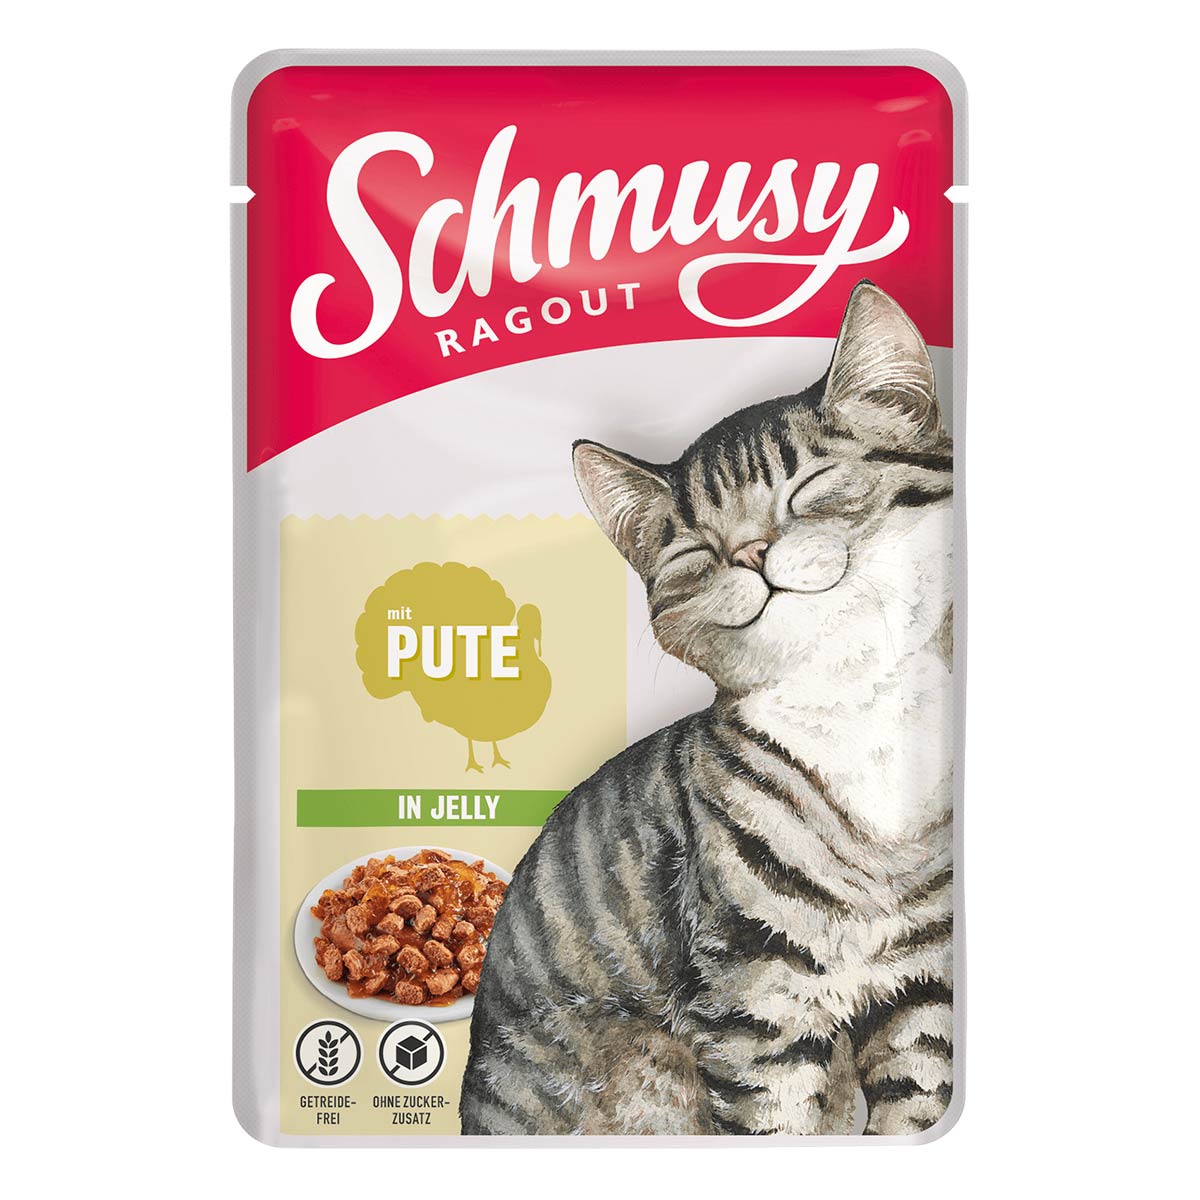 schmusy ragout jelly pute